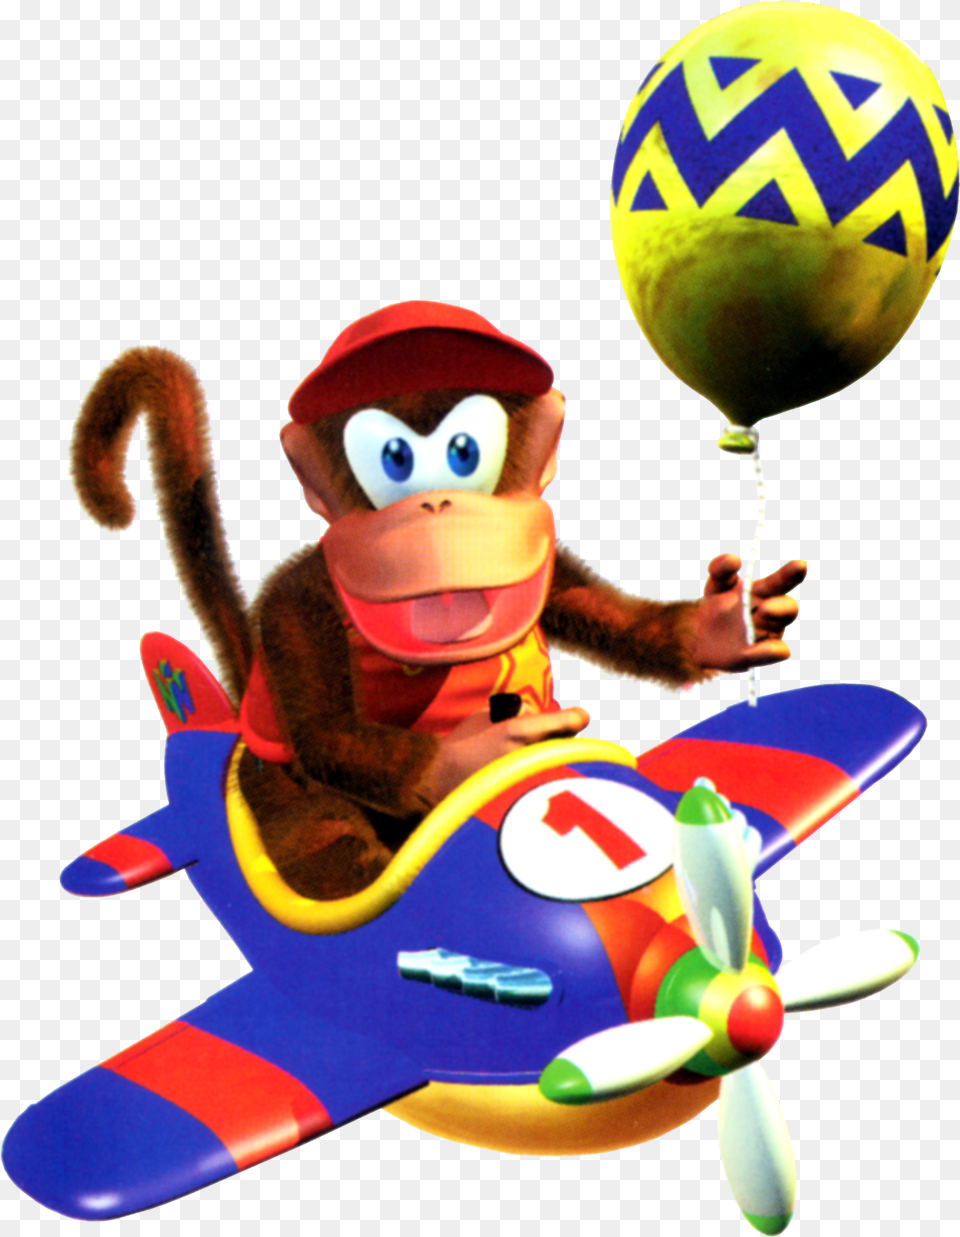 Diddy Kong Racing Diddy Kong Racing Diddy Kong, Toy, Balloon, Baby, Person Png